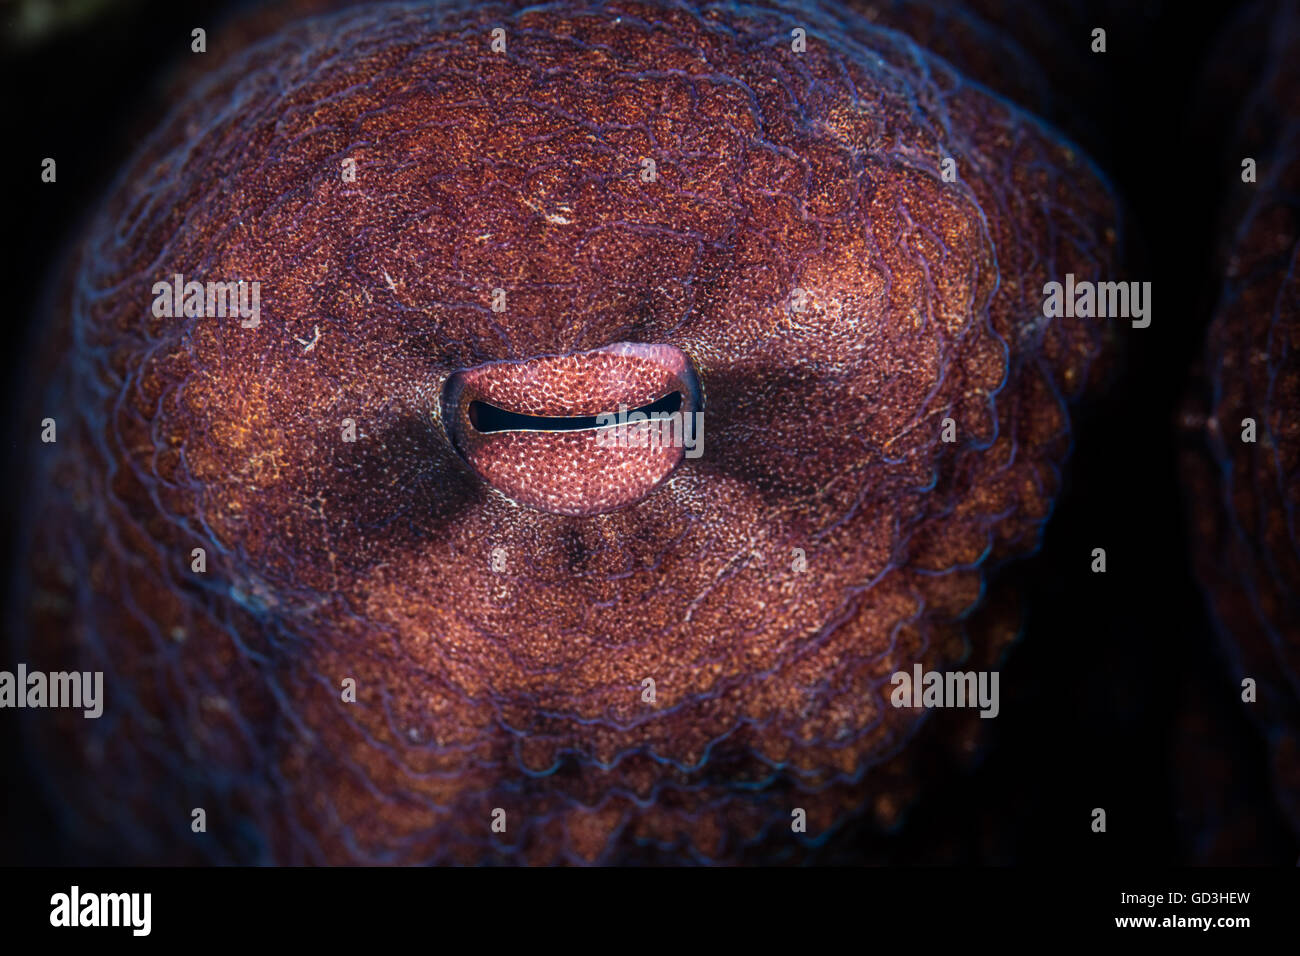 Detail of the eye of an octopus (Octopus cyanea). This cephalopod is found throughout the Indo-Pacific region. Stock Photo